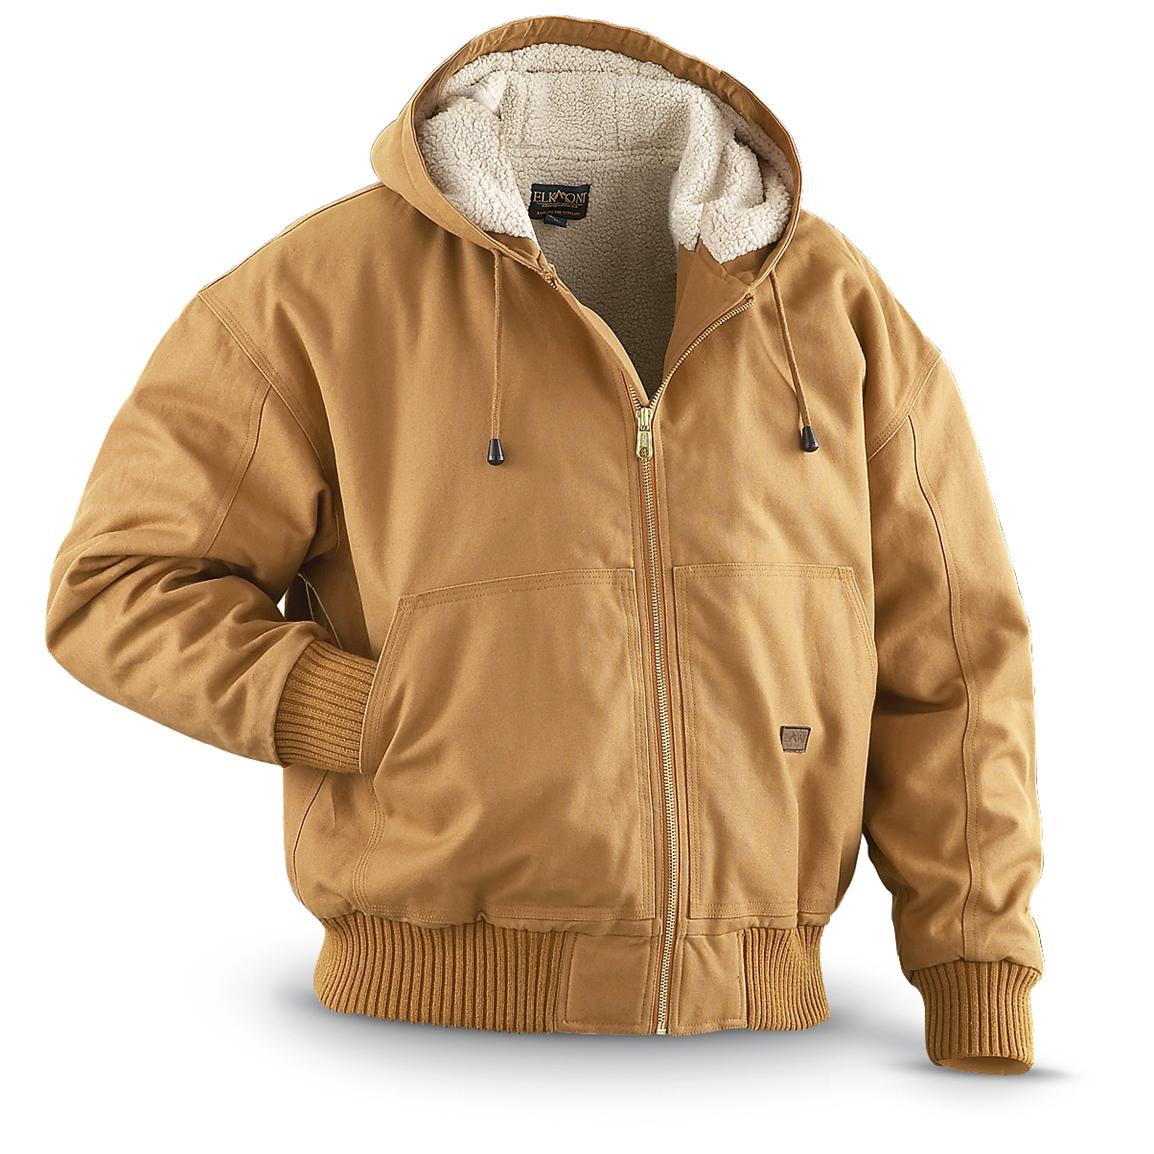 Rock Canyon® Fleece - lined Jacket, Brown Duck - 189440, Insulated ...